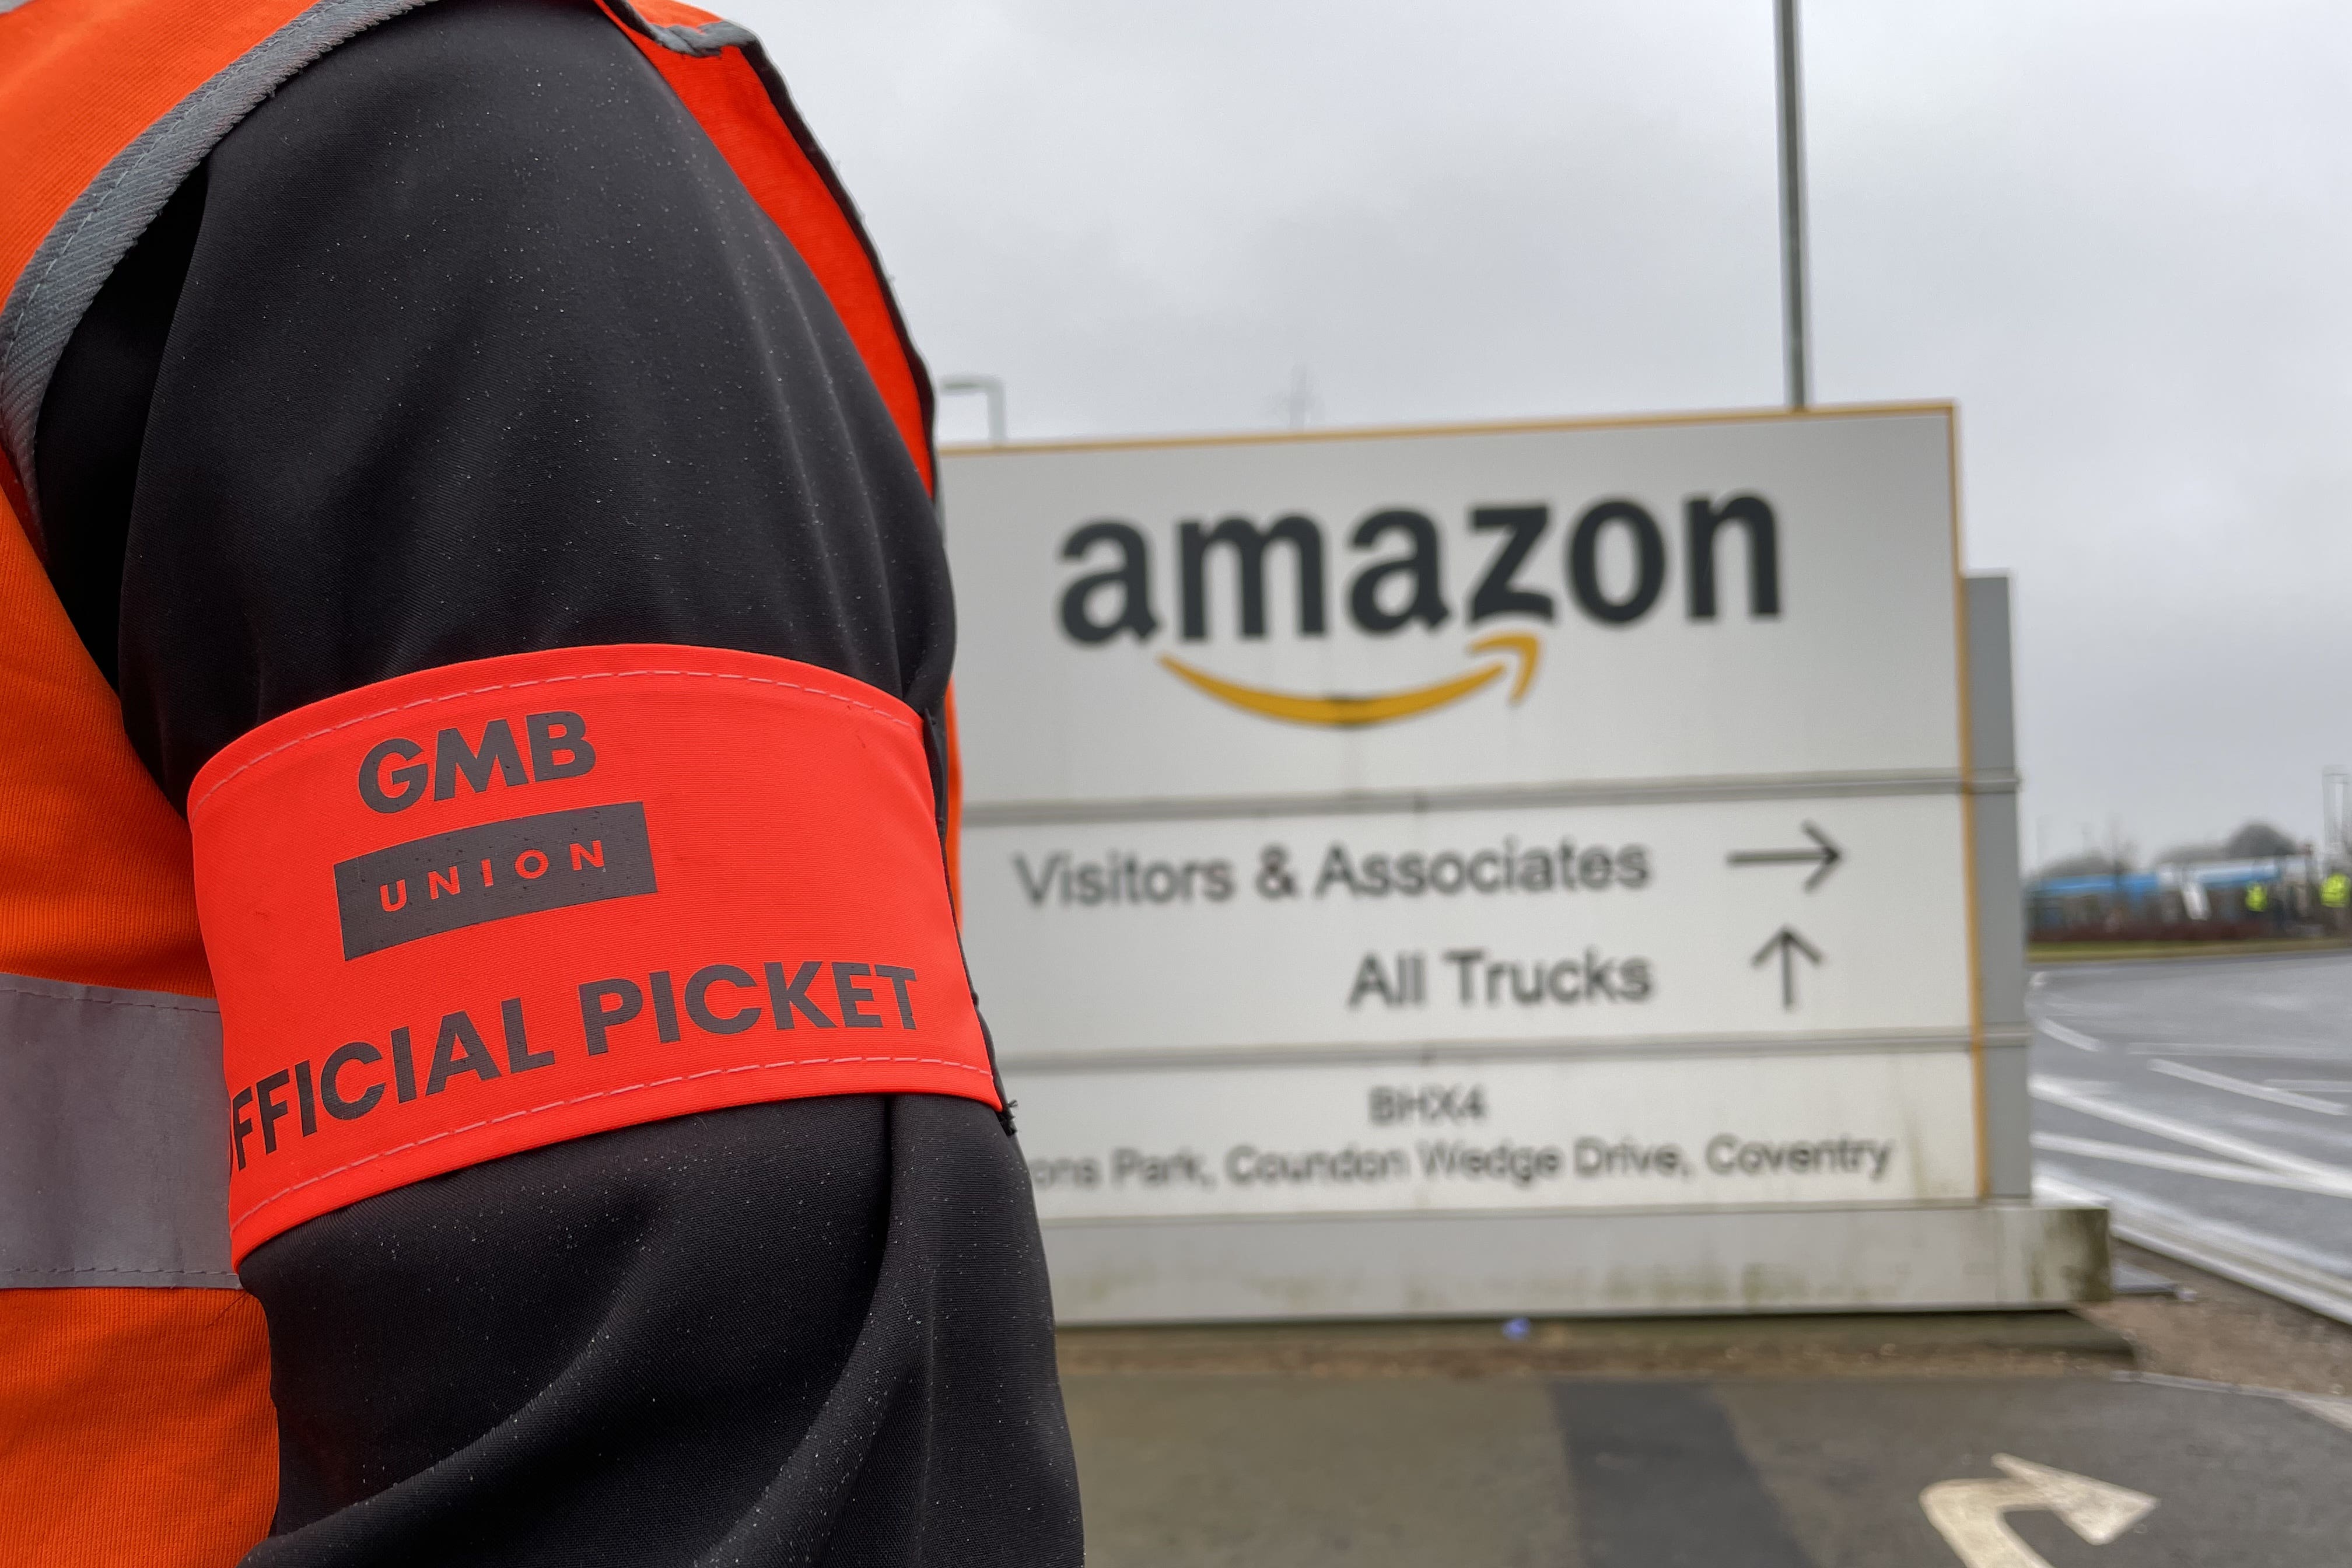 Members of the GMB union on the picket line outside the Amazon fulfilment centre in Coventry (Phil Barnett/PA)